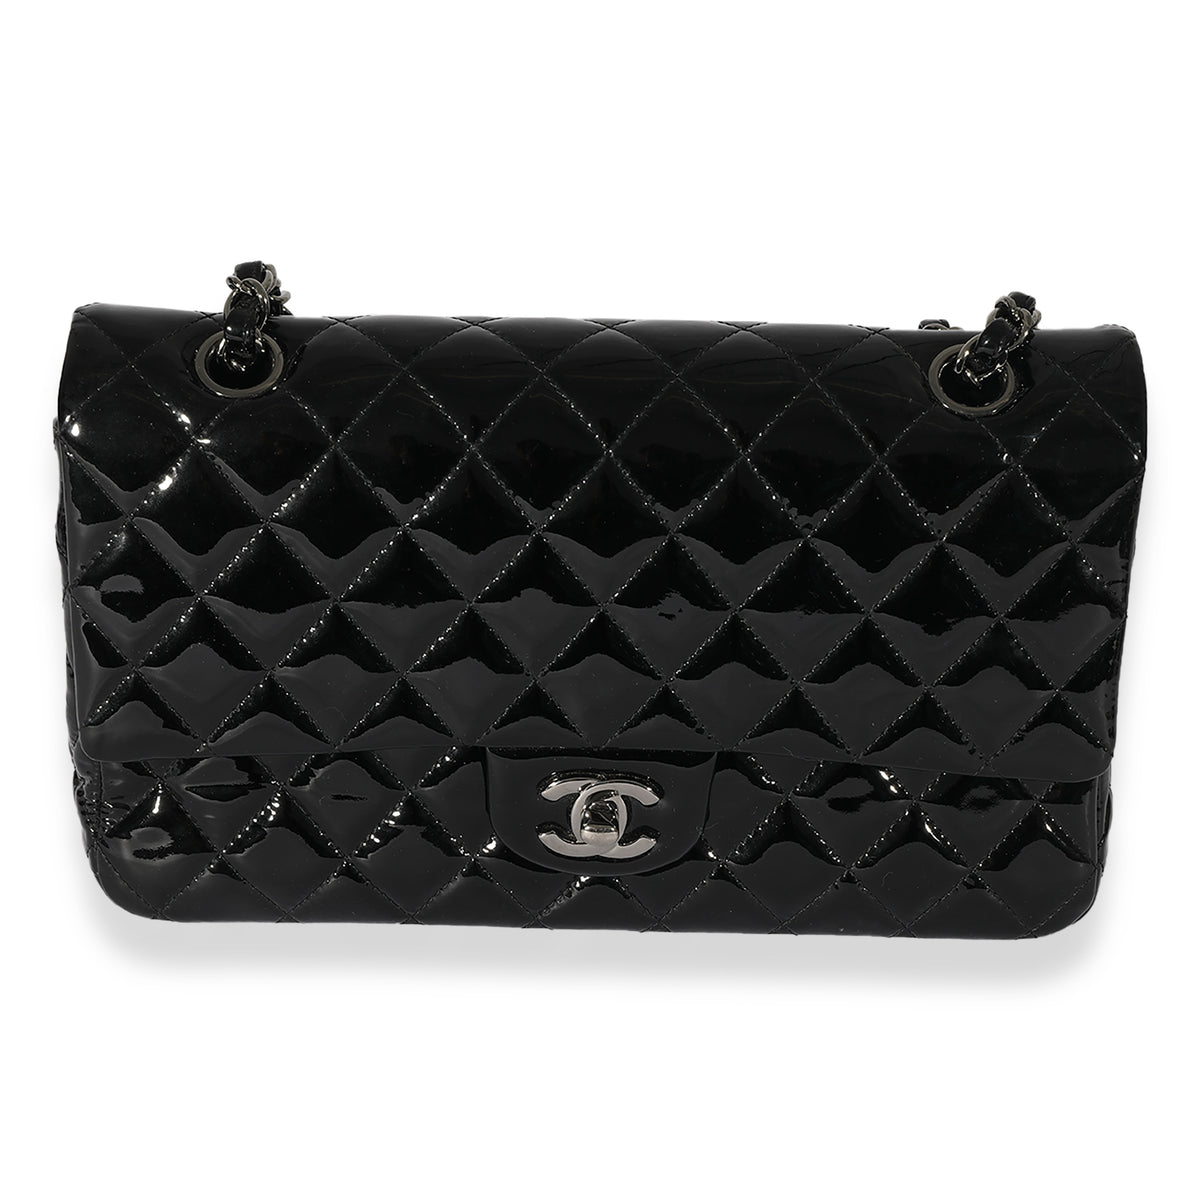 Chanel Bags: How to Buy Them and Which Style to Choose